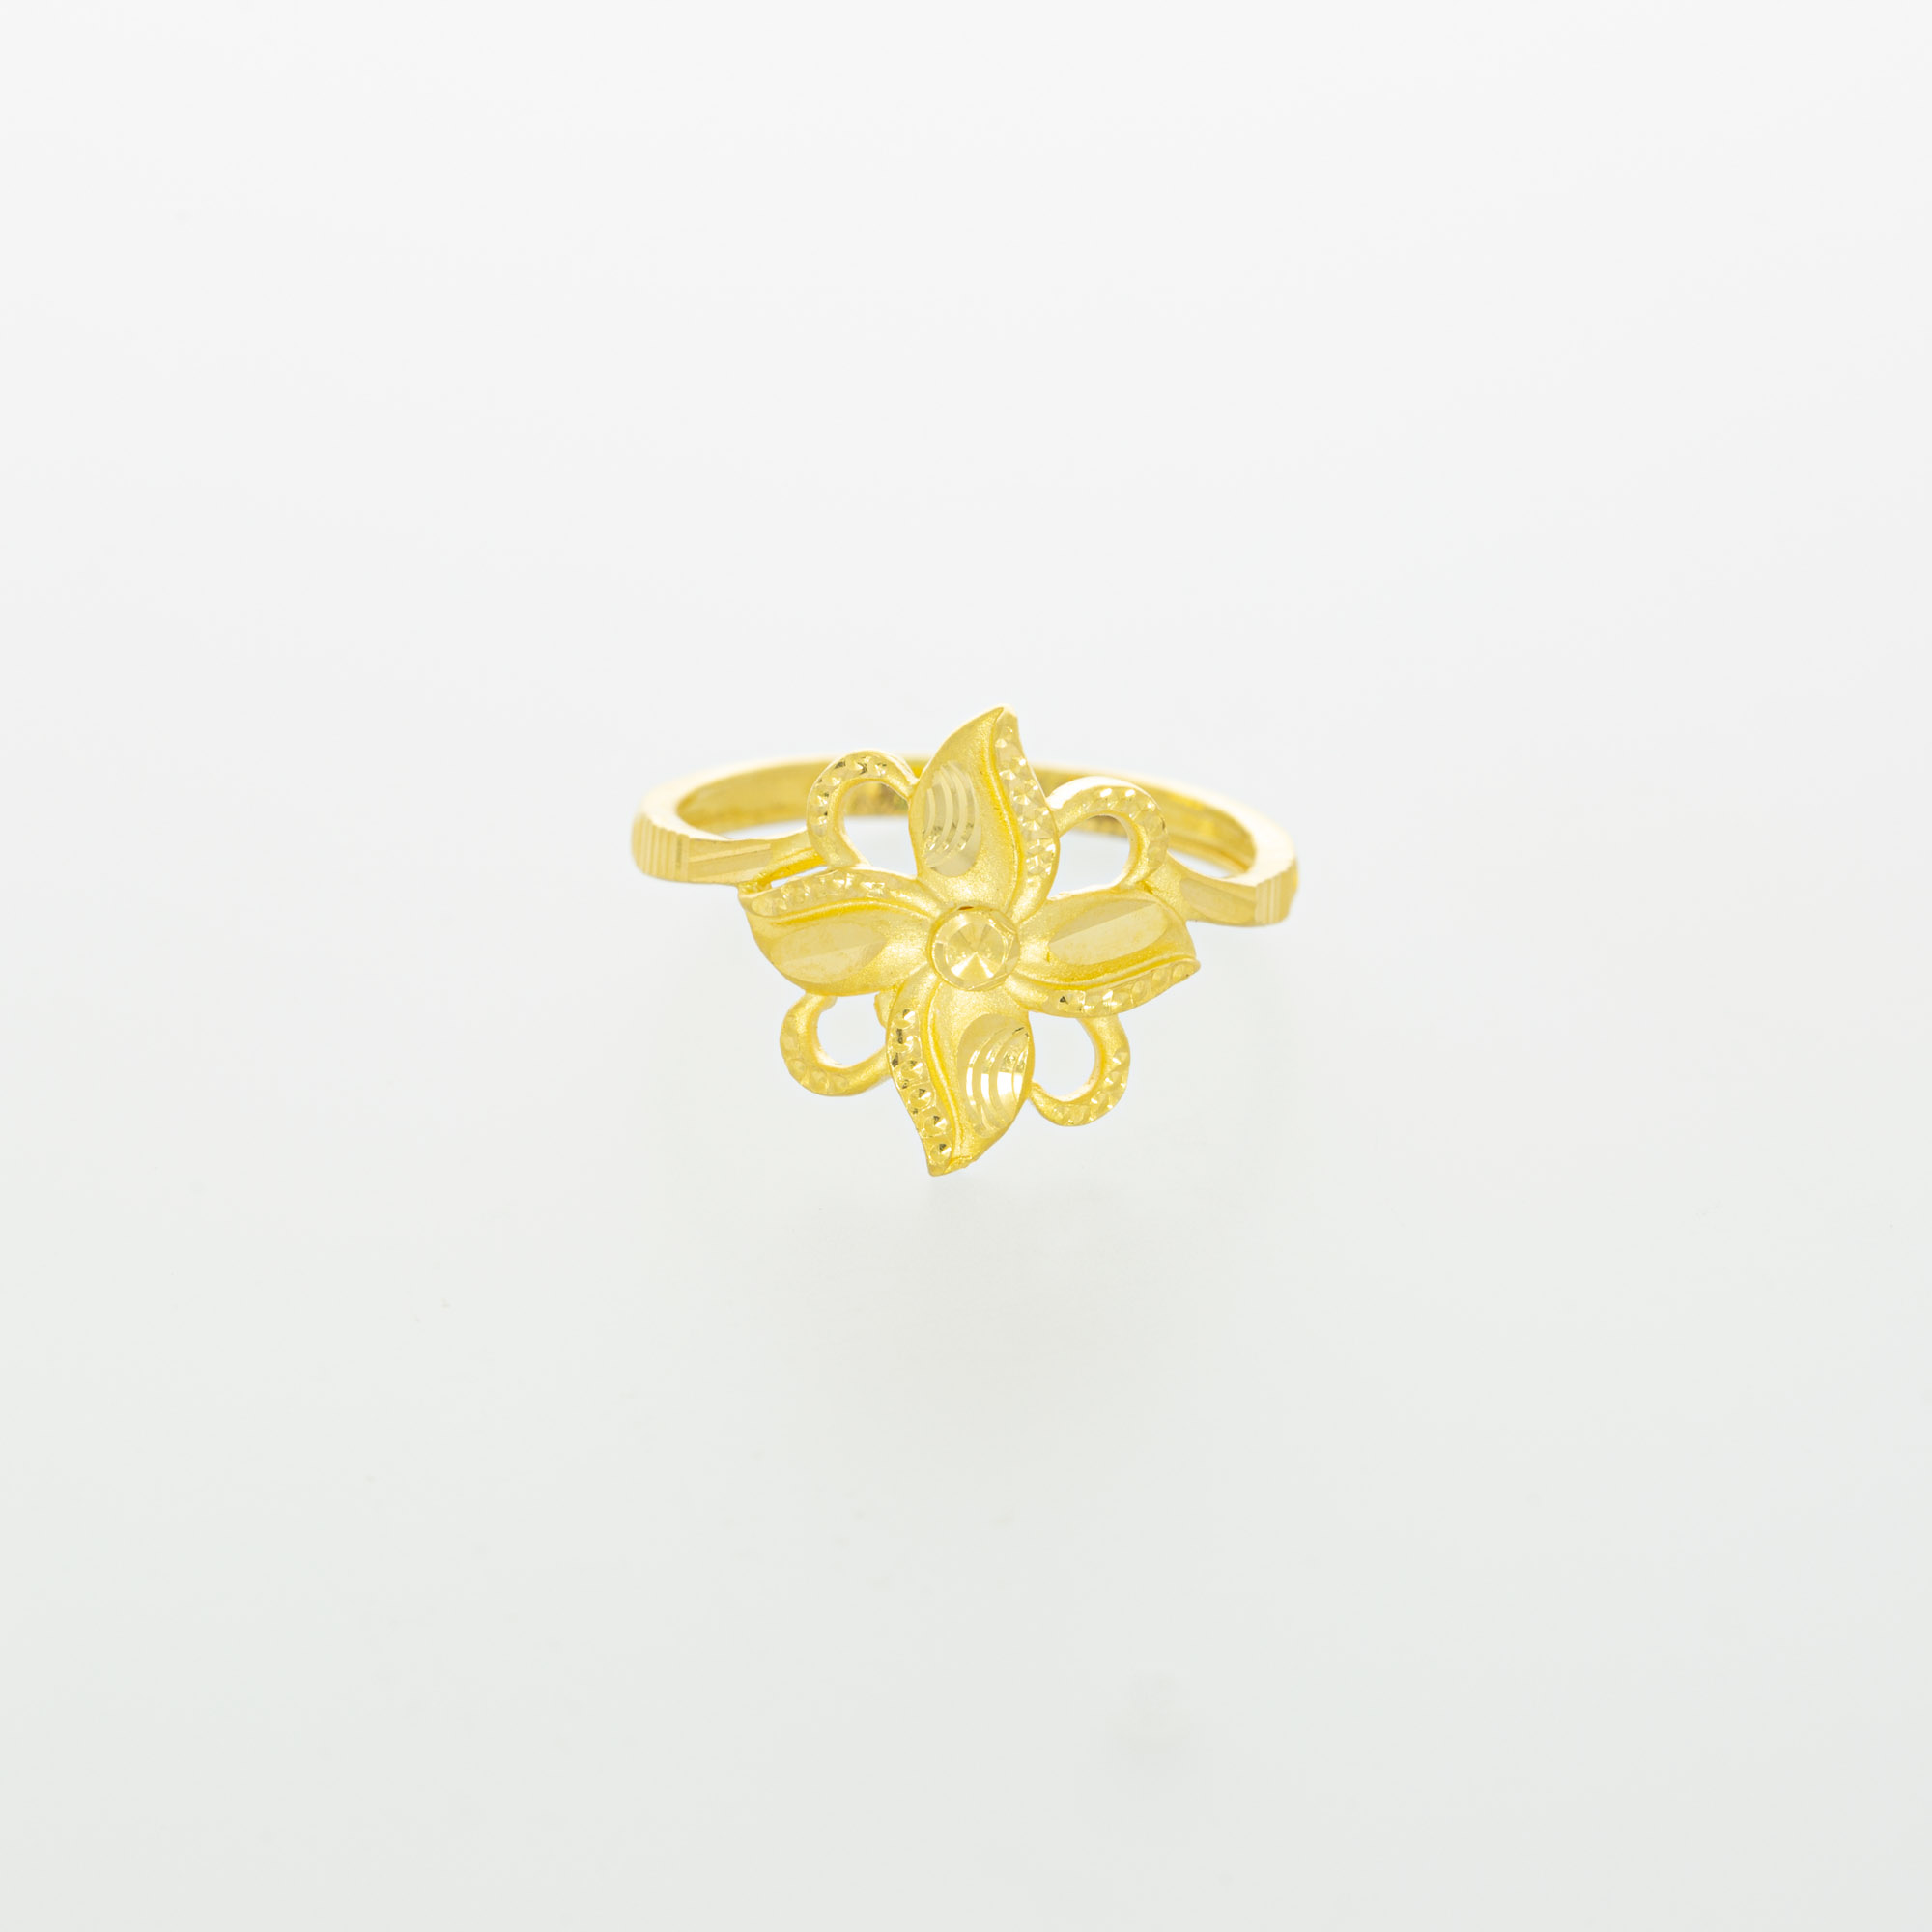 Light-Weight 22kt Floral Ring